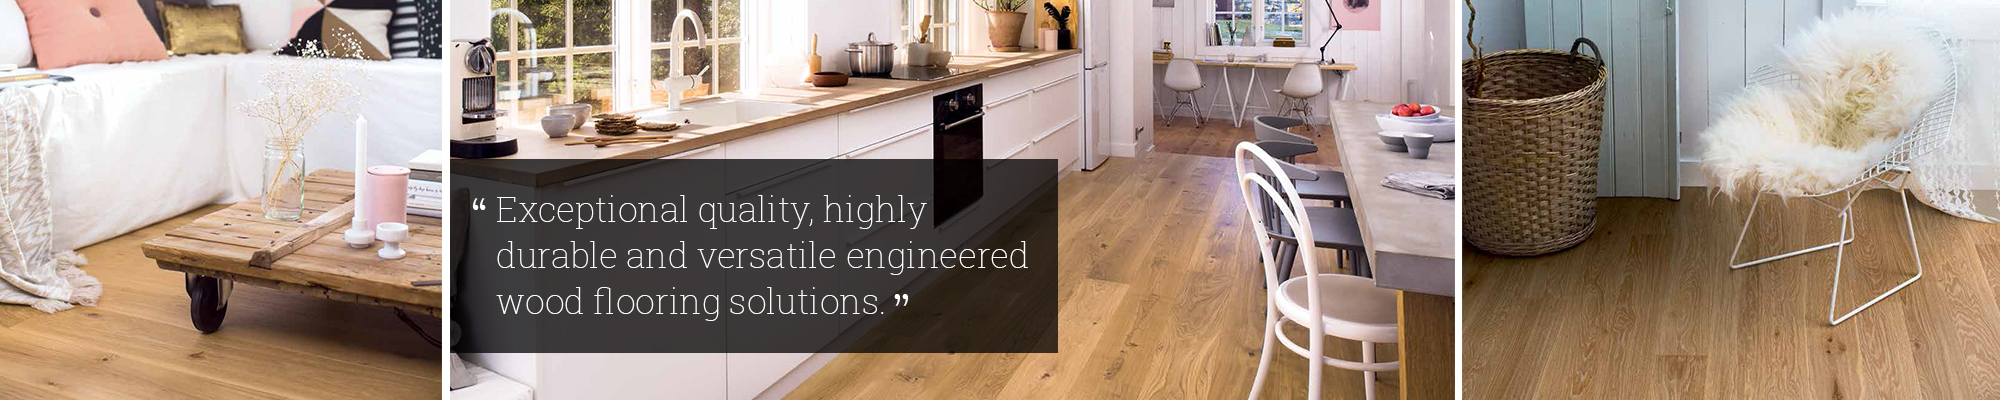 Commercial Engineered Wood Flooring Exeter